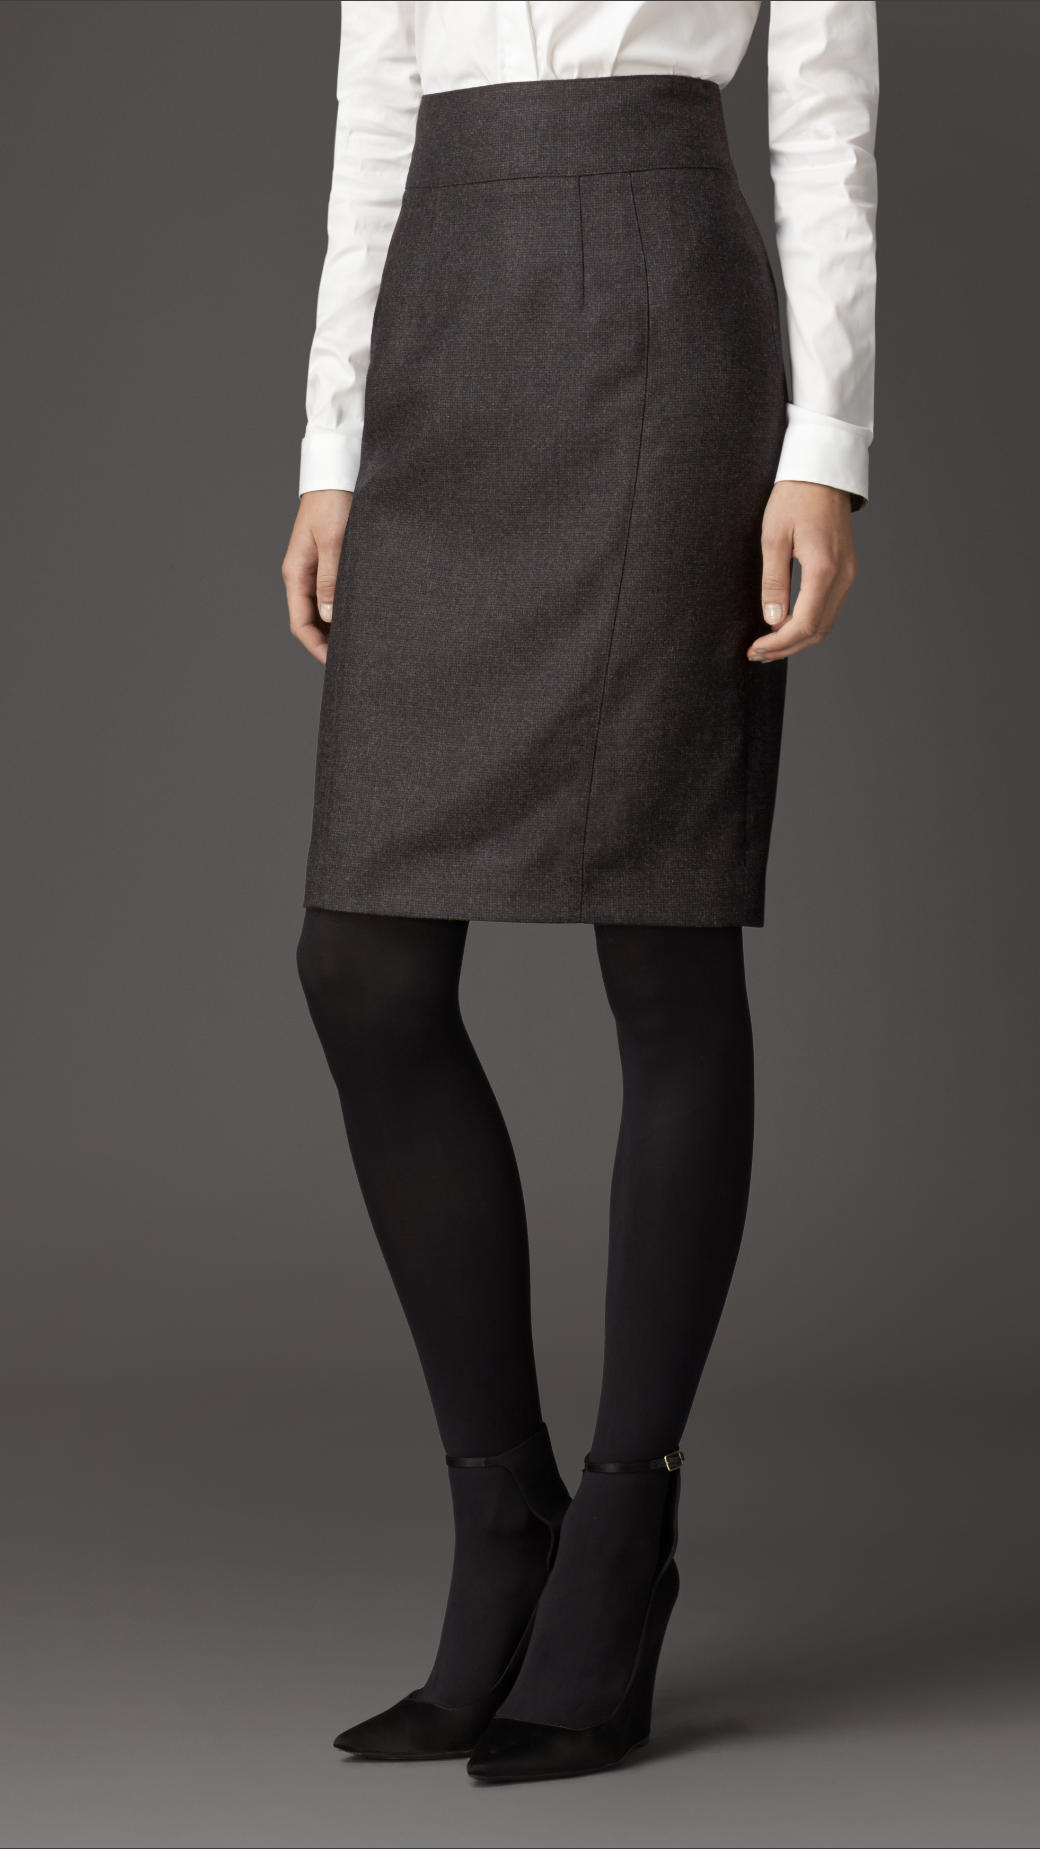 Lyst - Burberry Micro-check Wool Flannel Pencil Skirt in Gray